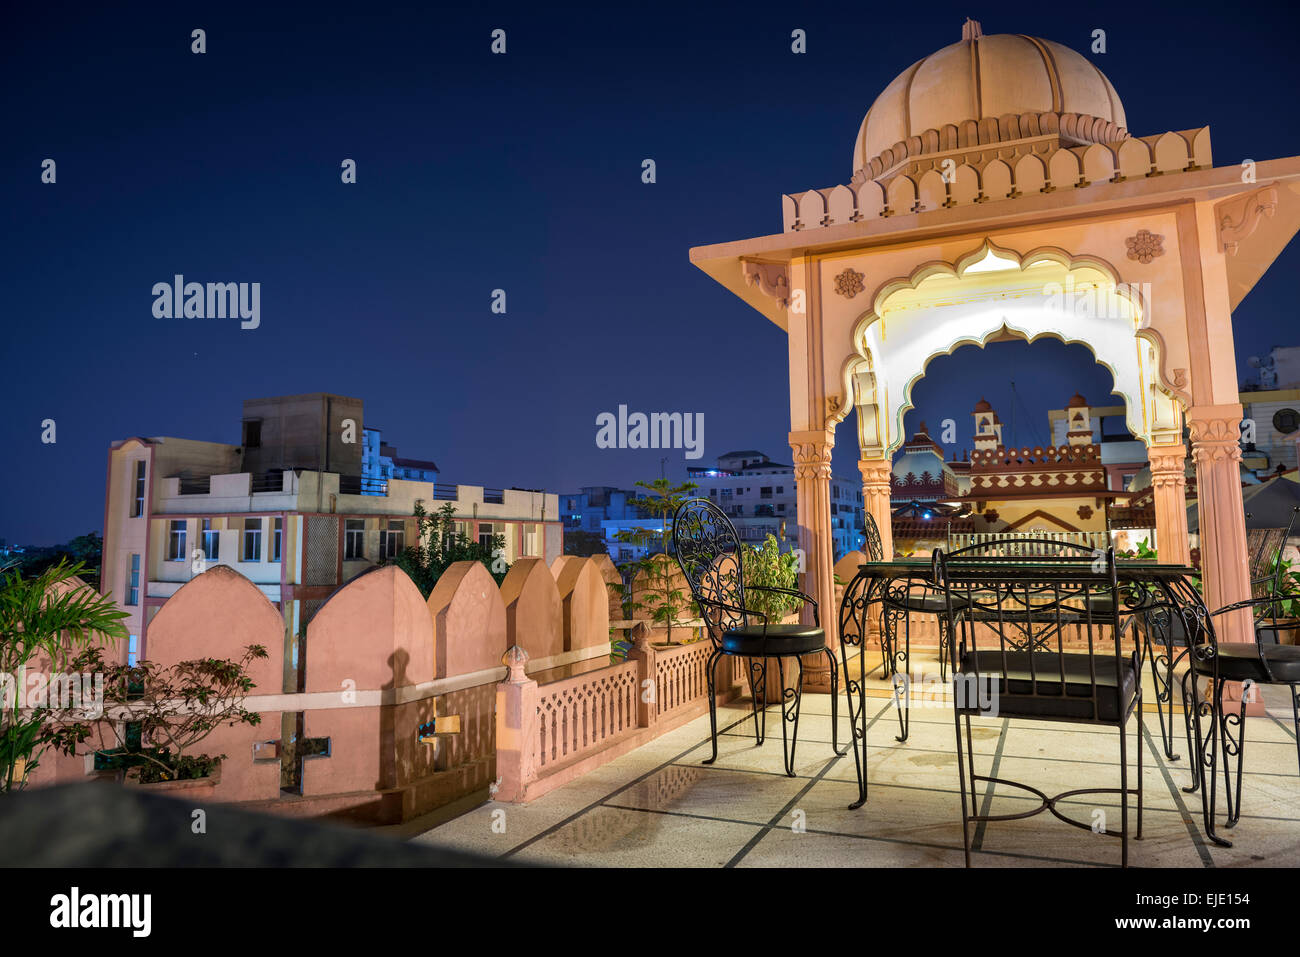 Hotel rooftop restaurant at night in Jaipur, Rajasthan, India Stock